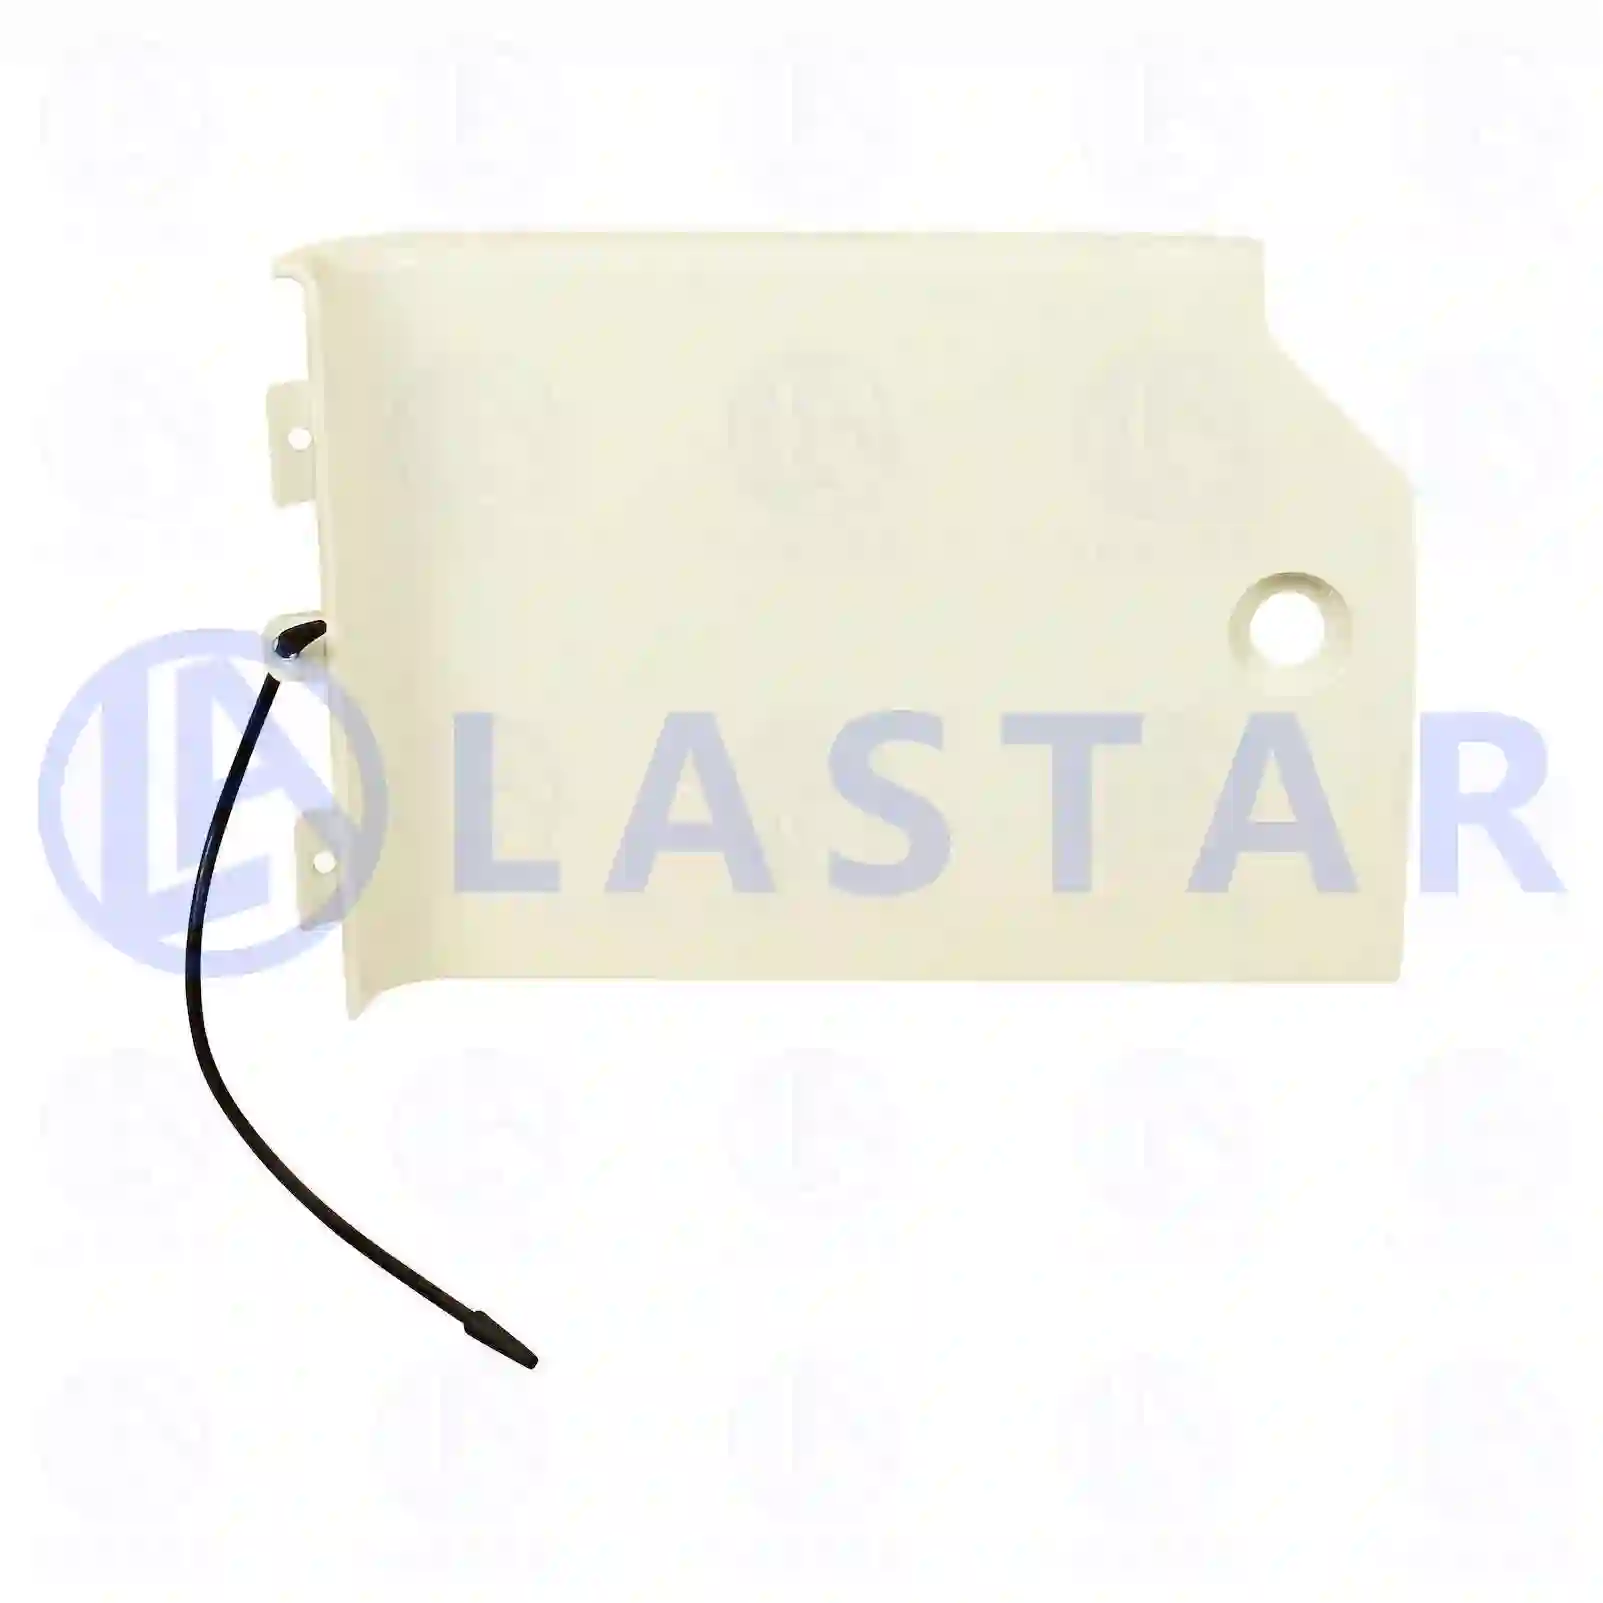 Cover plate, step well case, right, 77719779, 1837635, 1881347 ||  77719779 Lastar Spare Part | Truck Spare Parts, Auotomotive Spare Parts Cover plate, step well case, right, 77719779, 1837635, 1881347 ||  77719779 Lastar Spare Part | Truck Spare Parts, Auotomotive Spare Parts